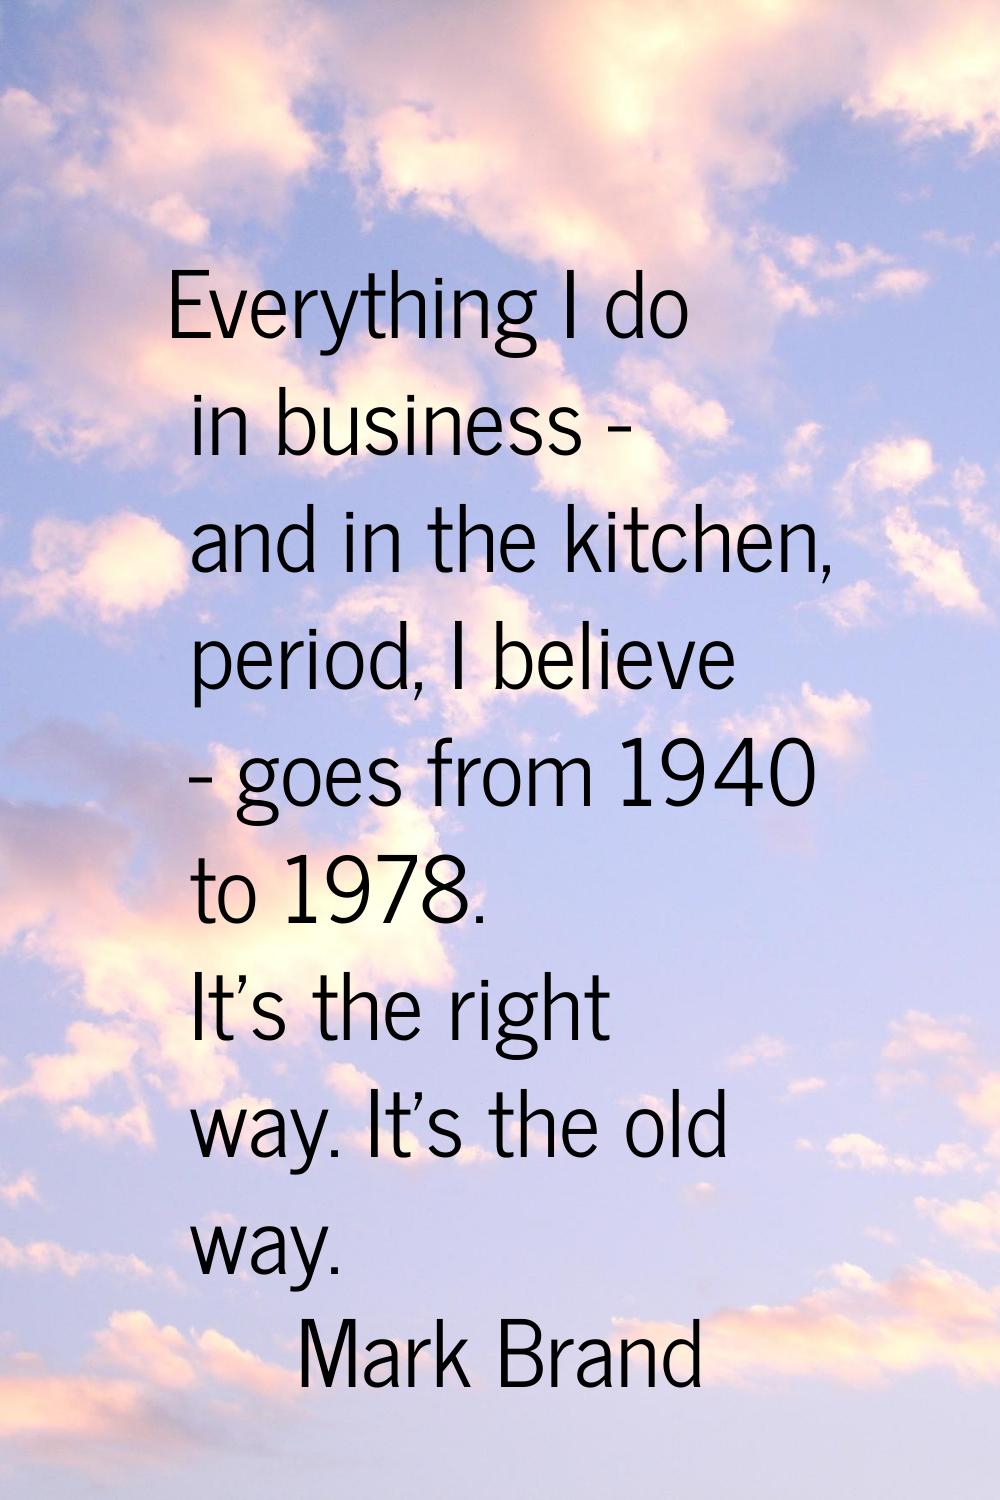 Everything I do in business - and in the kitchen, period, I believe - goes from 1940 to 1978. It's 